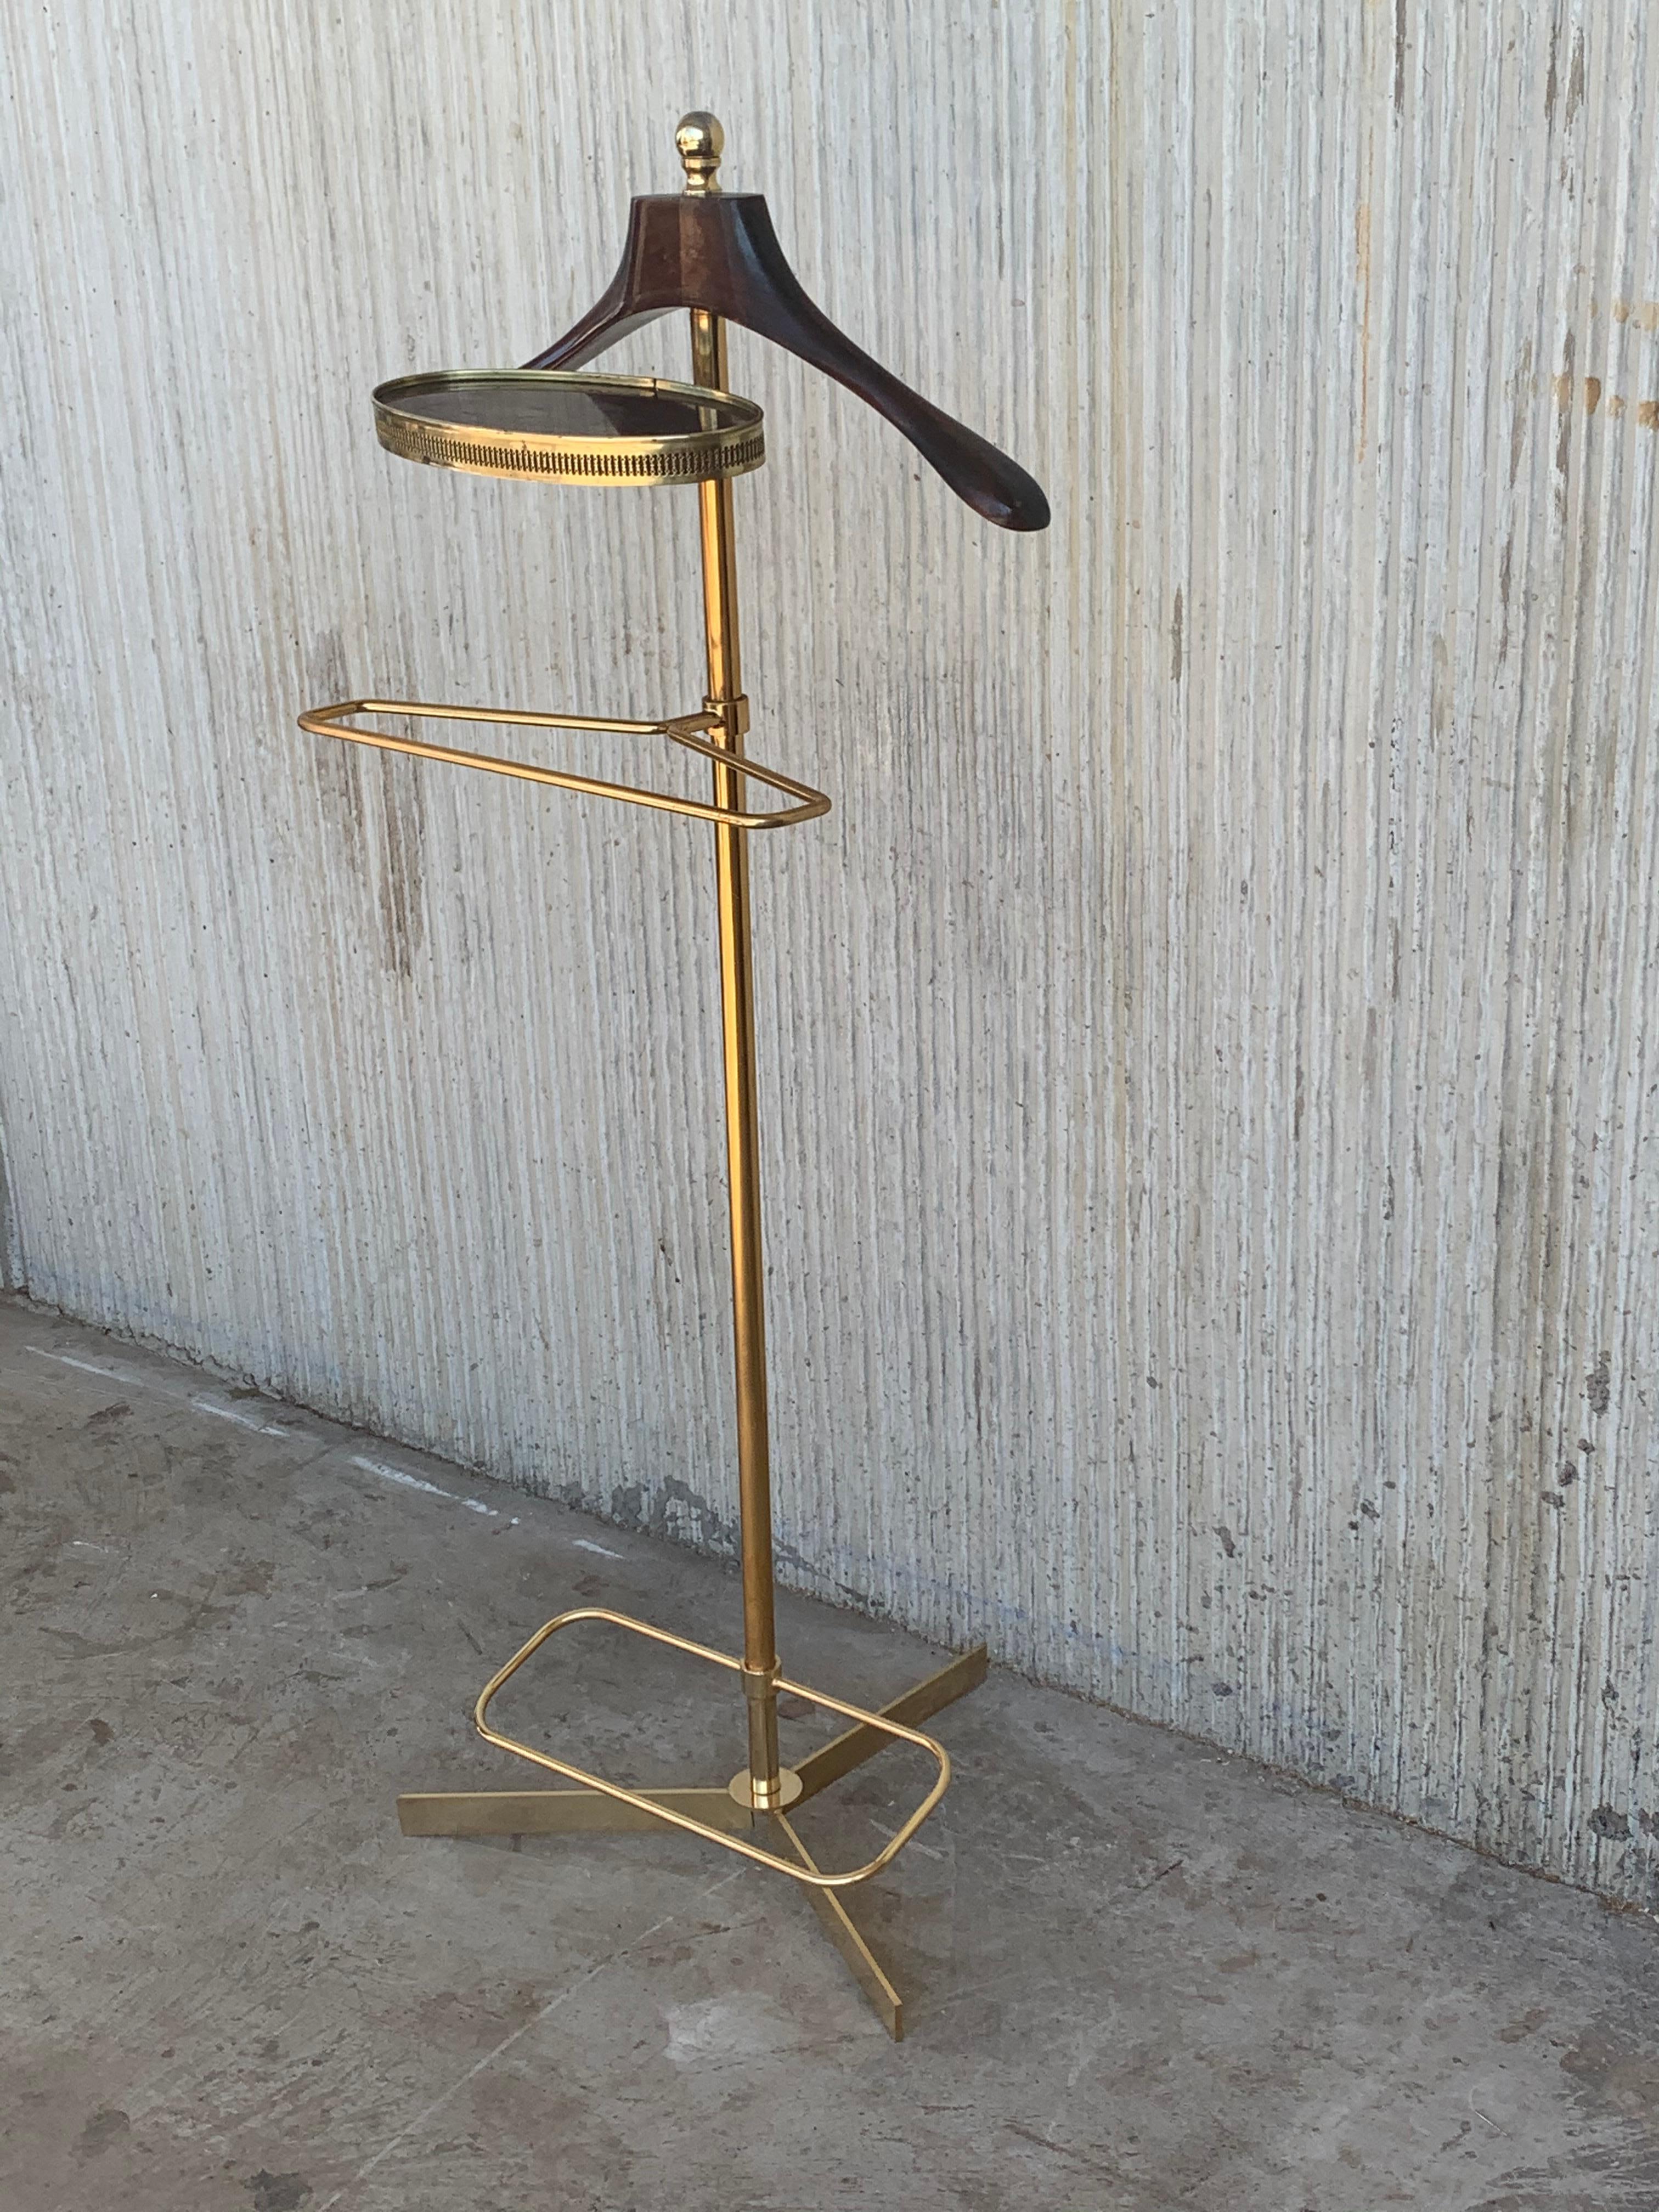 Vintage 1970s Italian brass and wood dressboy valet stand, with Classic carved column and pedestals.
A great piece that perfectly adds to every home decor the typical glitz, glamour, and gold of Hollywood Regency style with its metallic golden